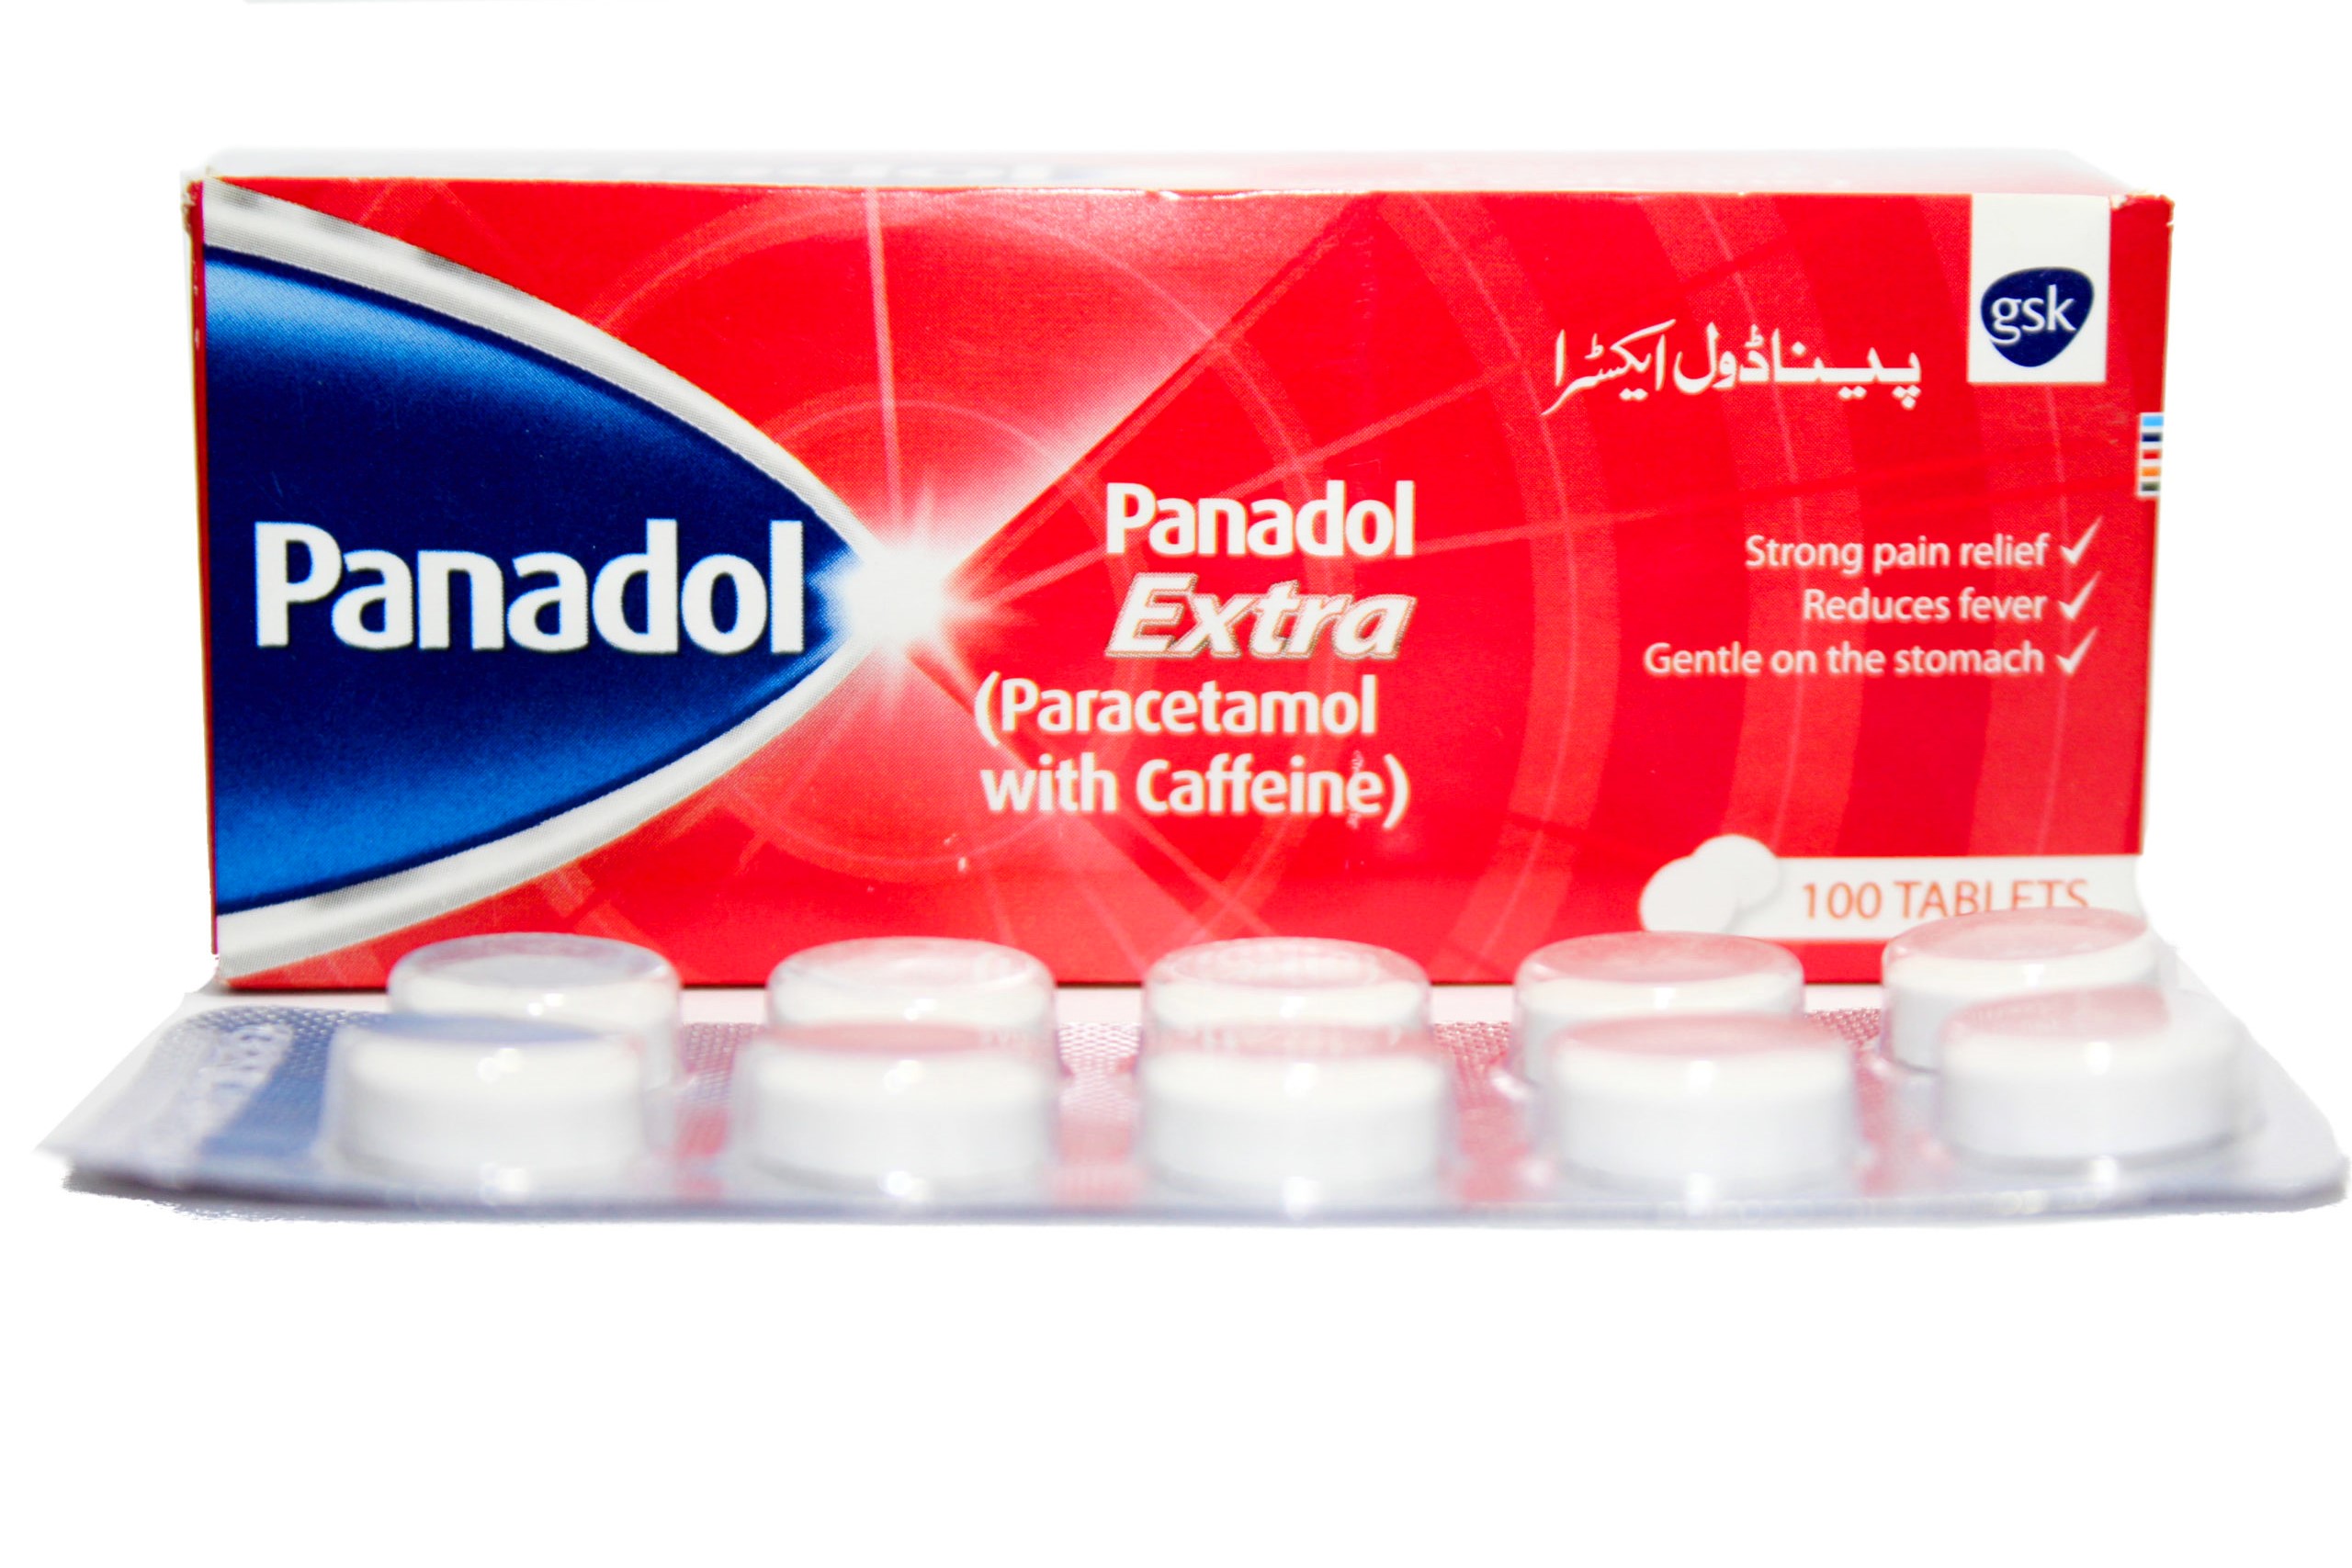 What are the reasons for the shortage of Panadol pills in Pakistan